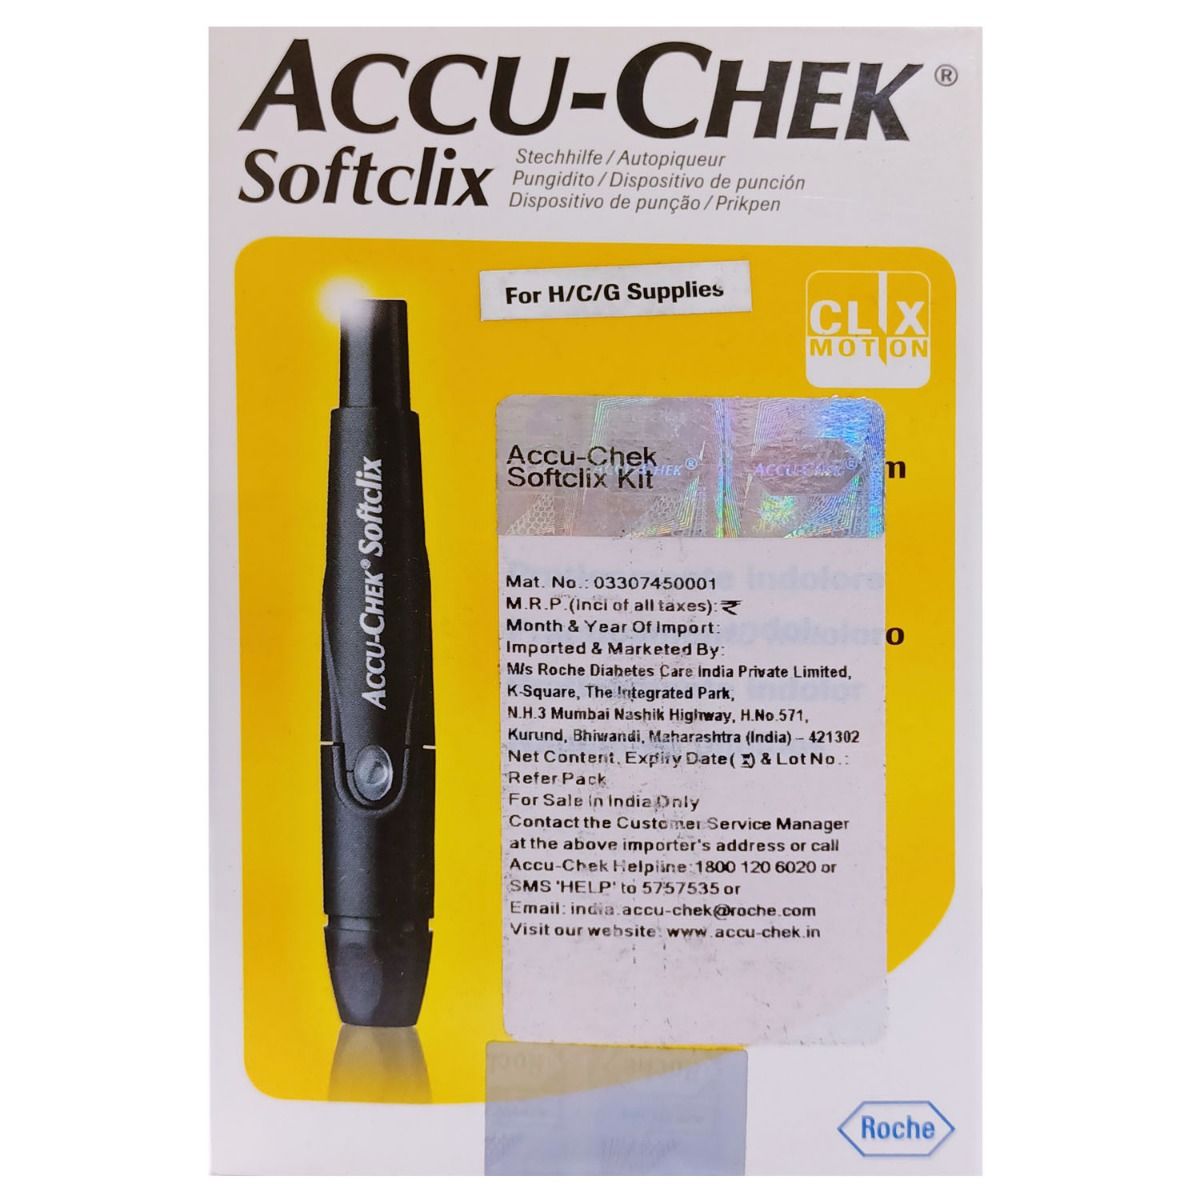 Accu-Chek Softclix Lancing Device, 1 Count, Pack of 1 